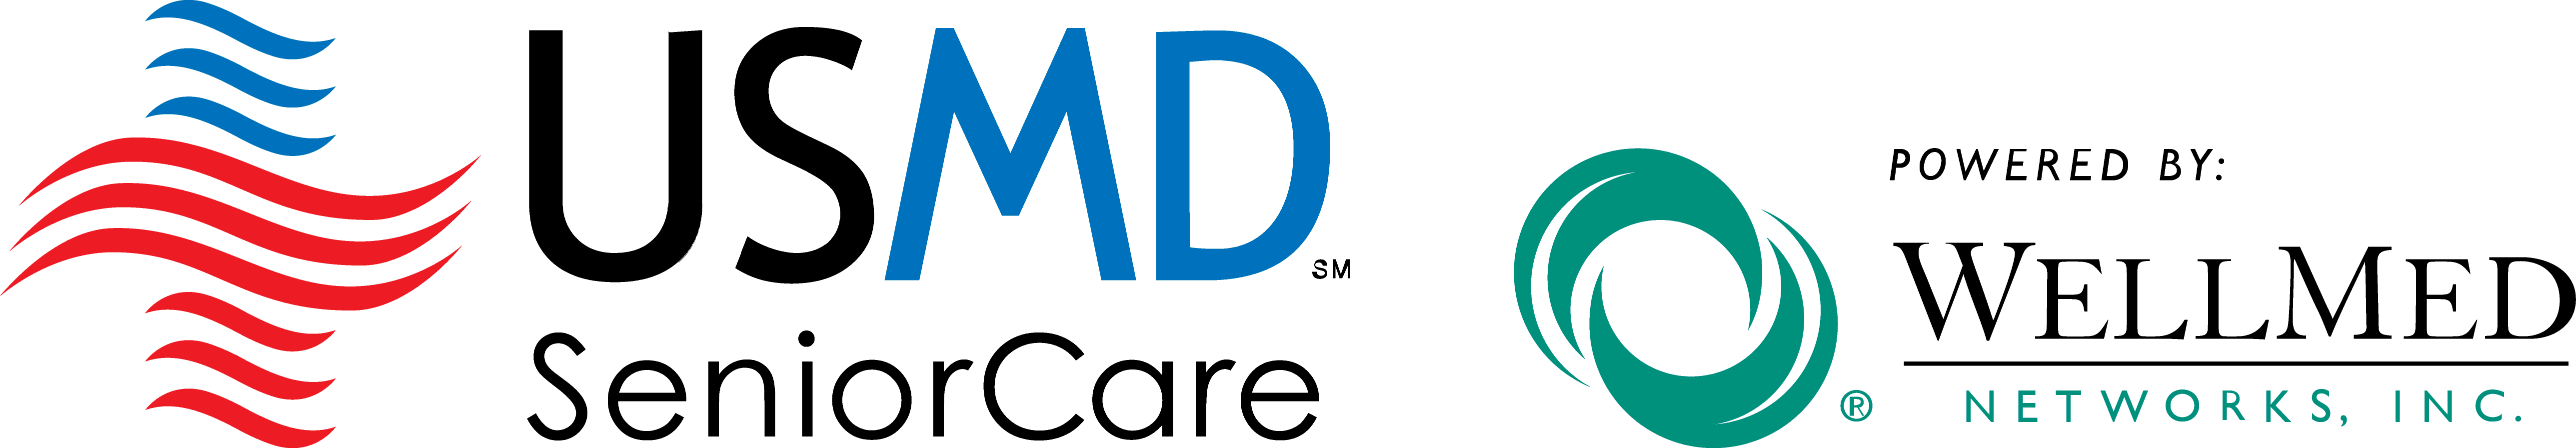 USMD Senior Care Powered by WellMed Networks, Inc. Home